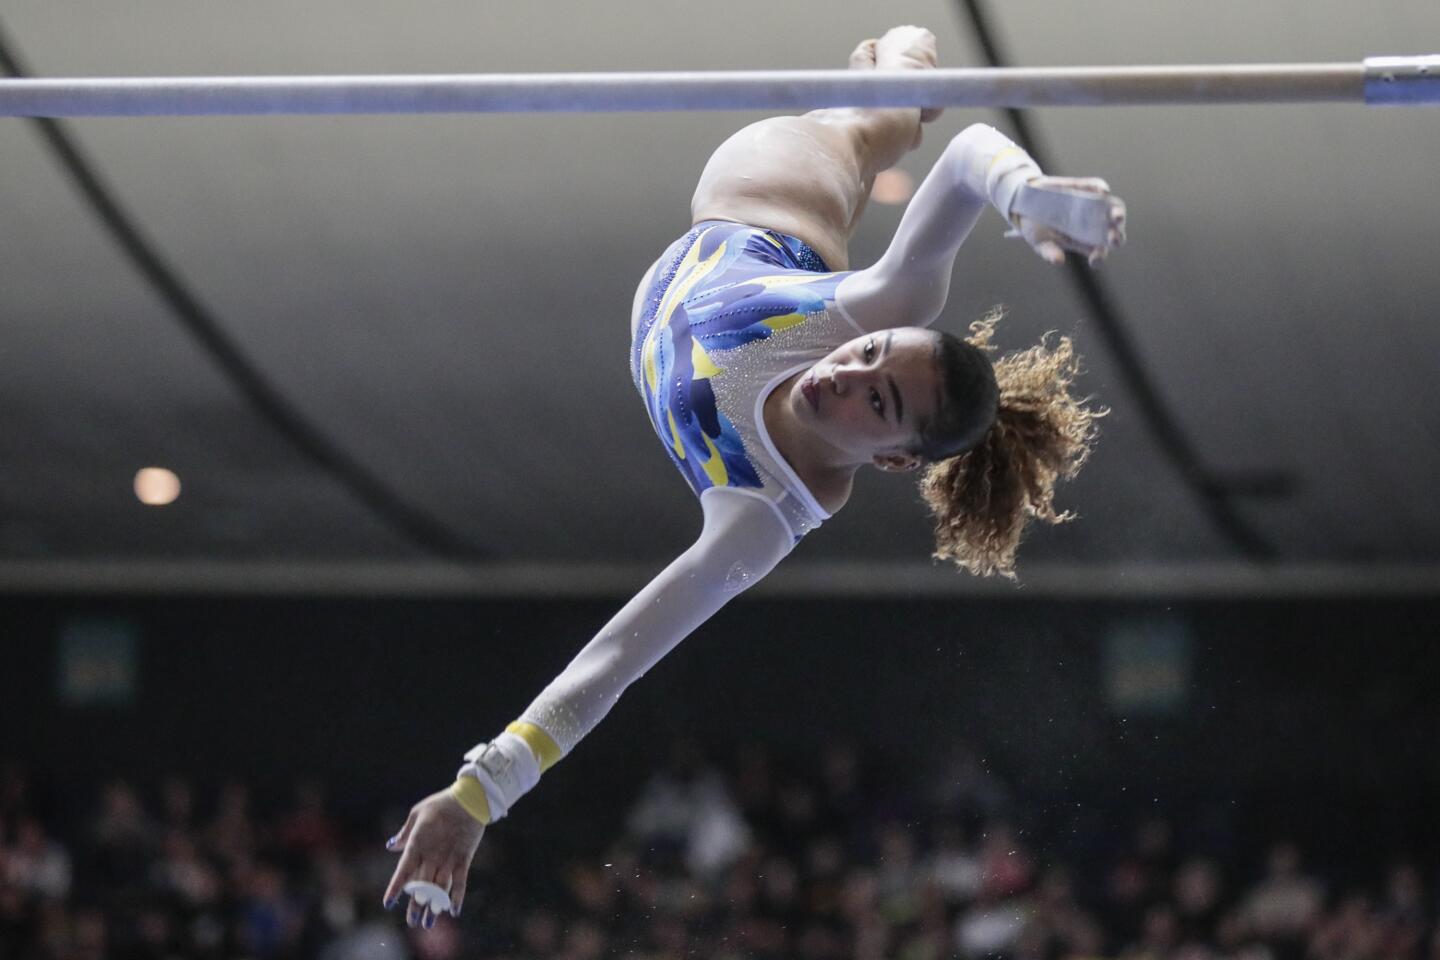 The Bruins' Margzetta Frazier competes on the bars at the Collegiate Challenge gymnastics meet Saturday night.